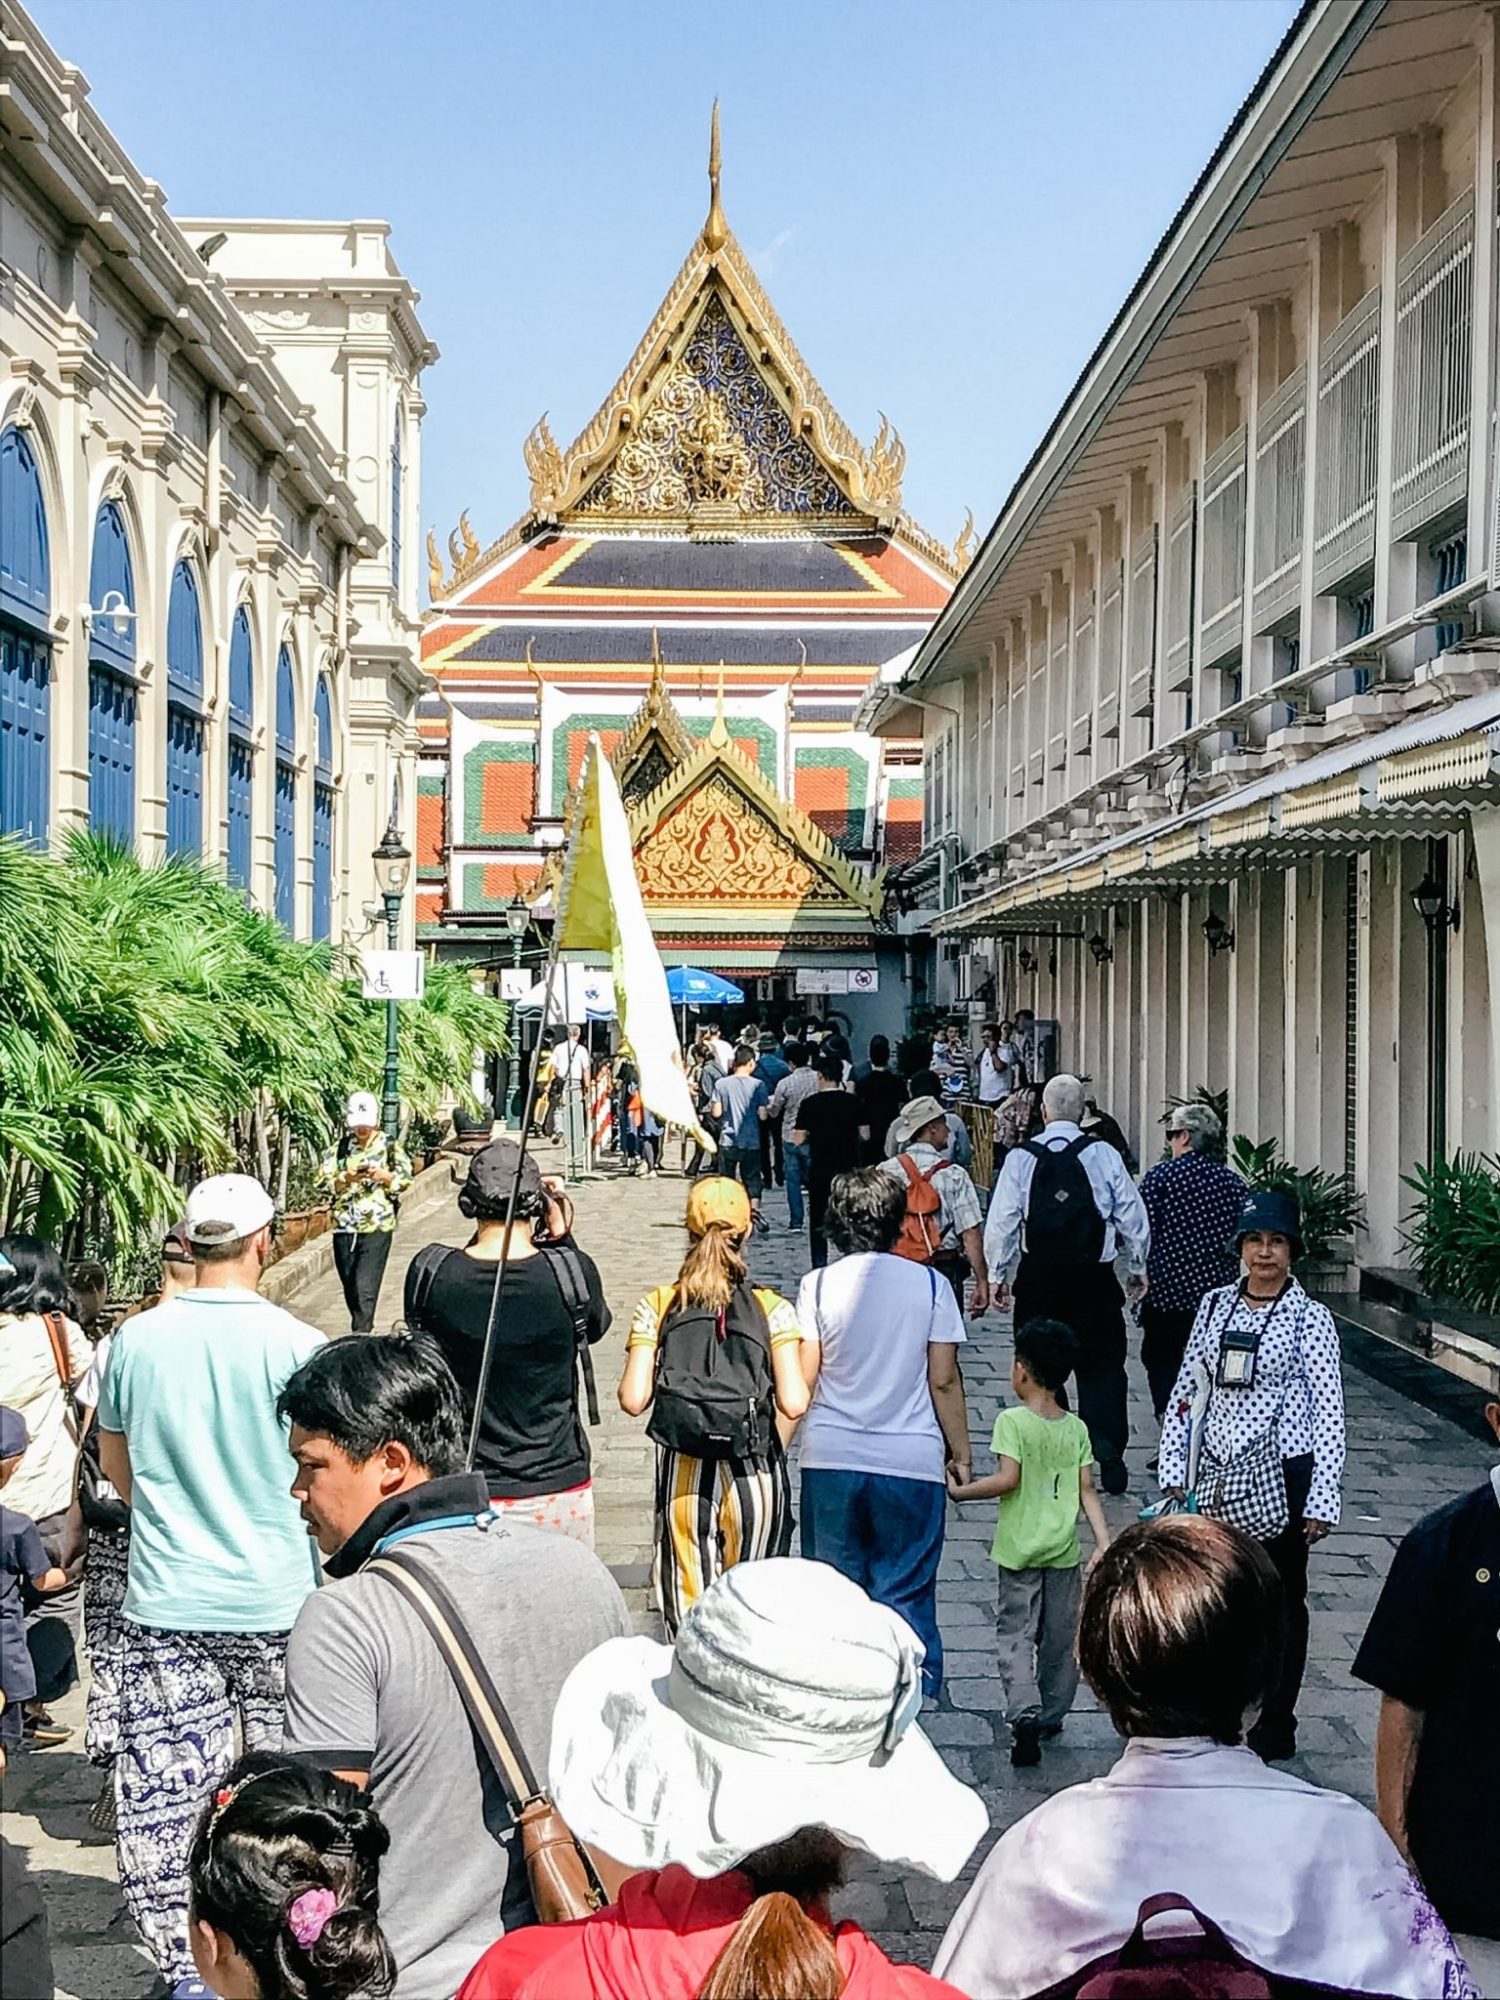 The entrance to a temple in Bangkok and our first activity in Thailand